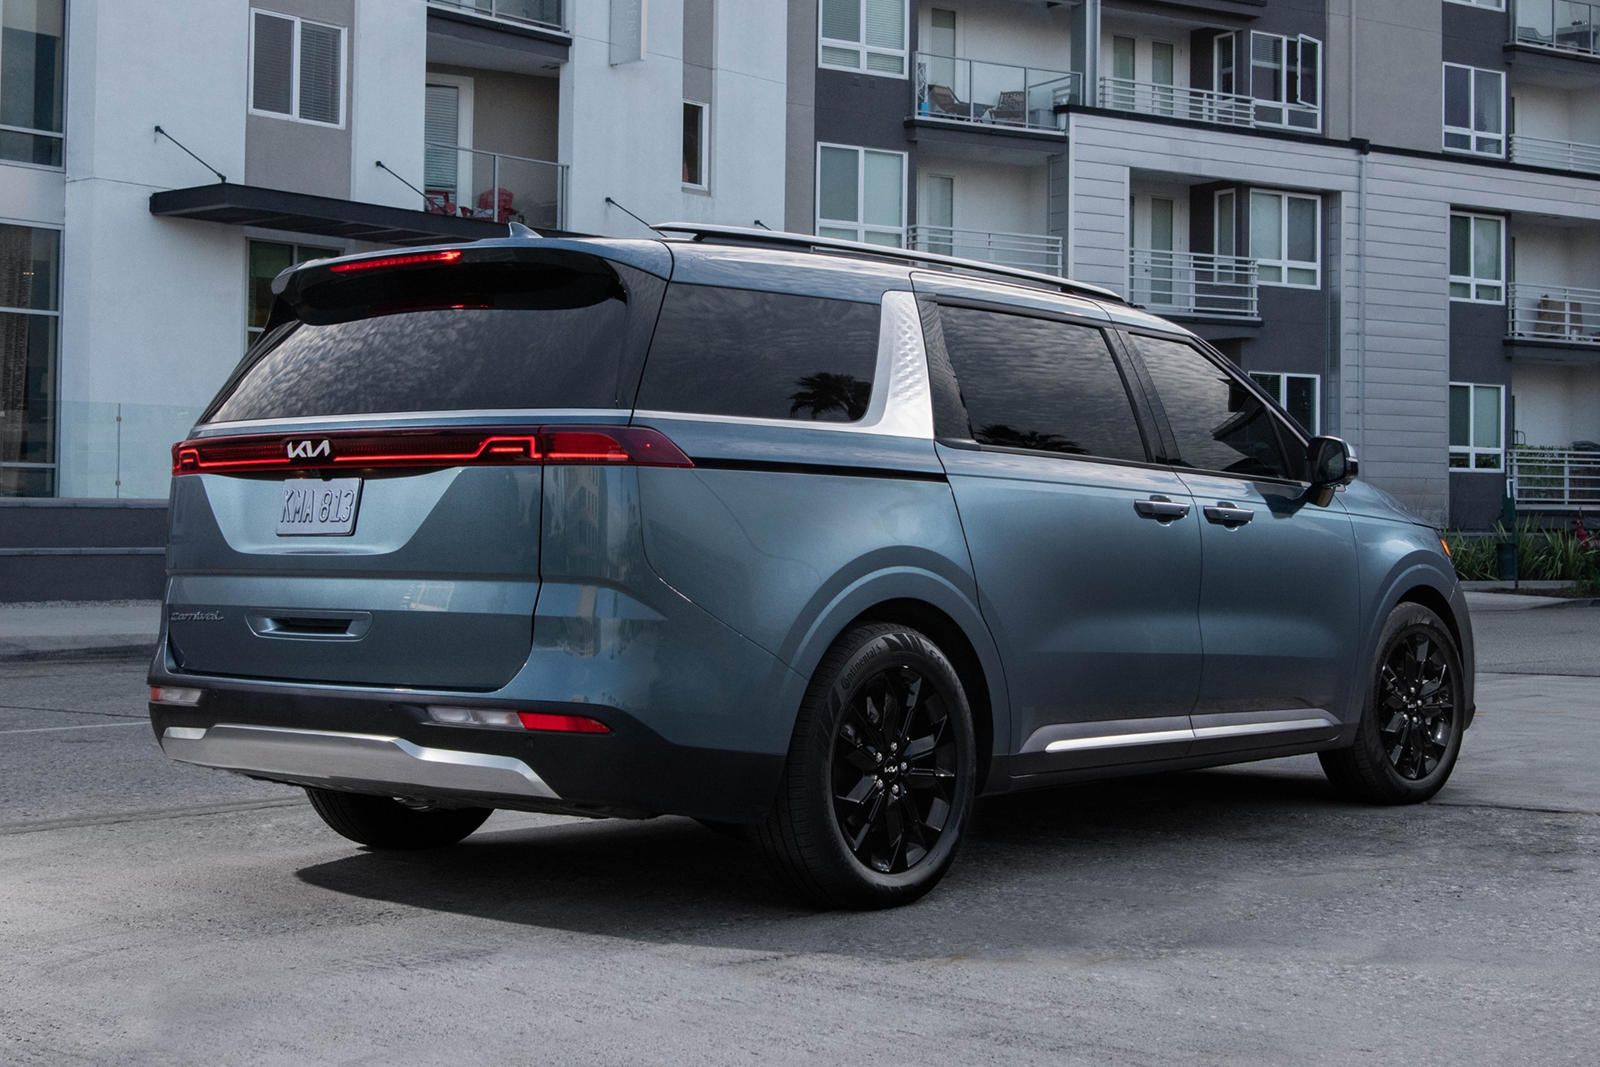 2022 Kia Carnival First Look Review The SUV Of Minivans